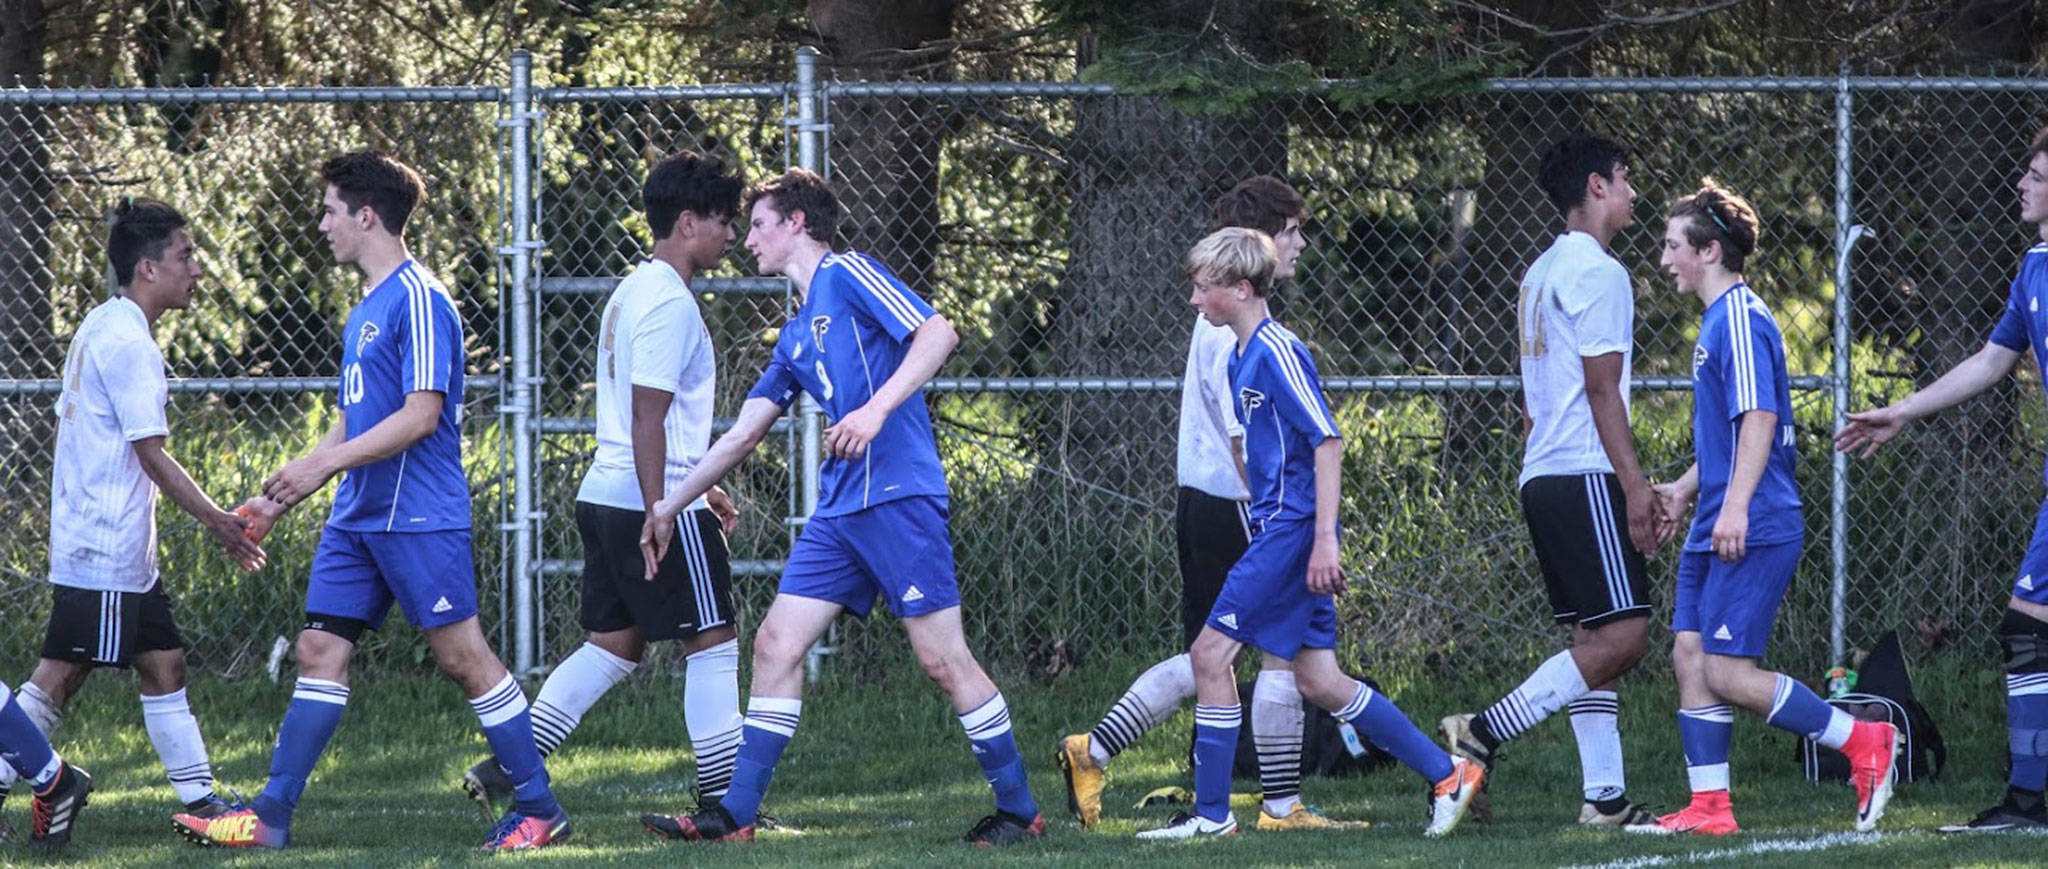 South Whidbey players (blue uniforms) shake hands with Meridian after winning Wednesday’s district tournament semi-final match. (Photo by Matt Simms)